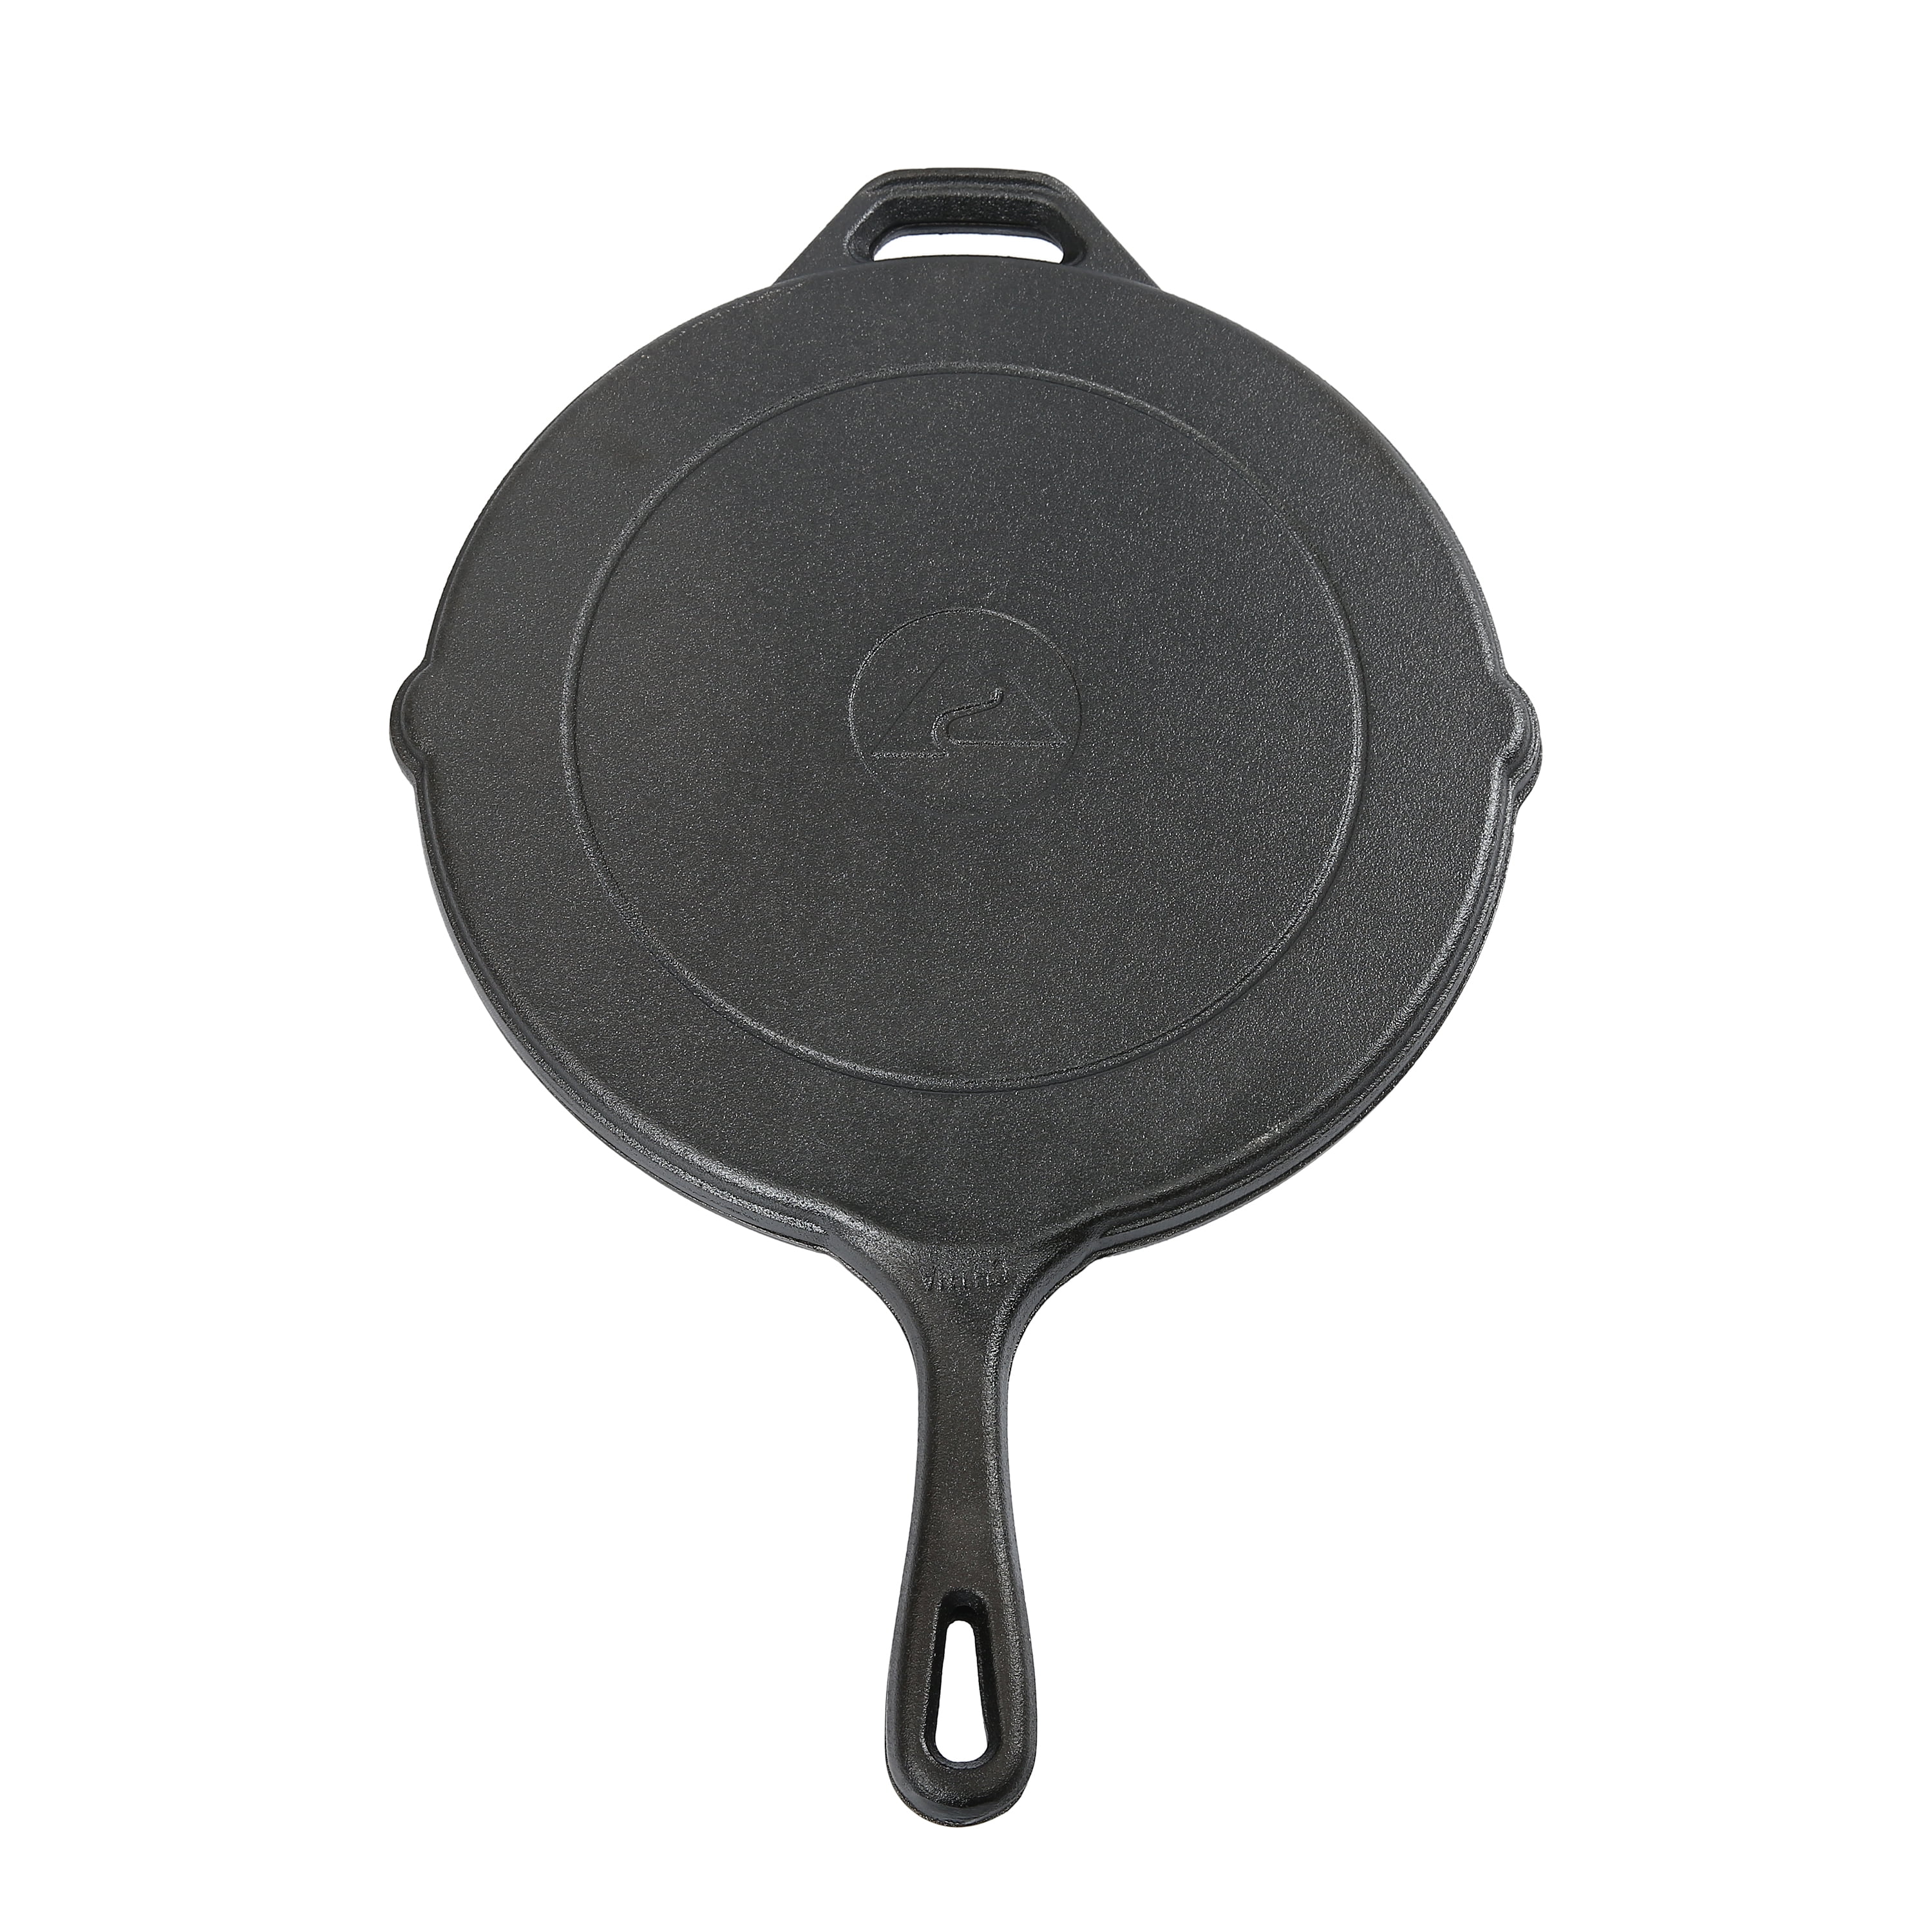 Ozark Trail 12 Lightweight Cast Iron Skillet with Collapsible Silicone Handle, Size: 12 inch